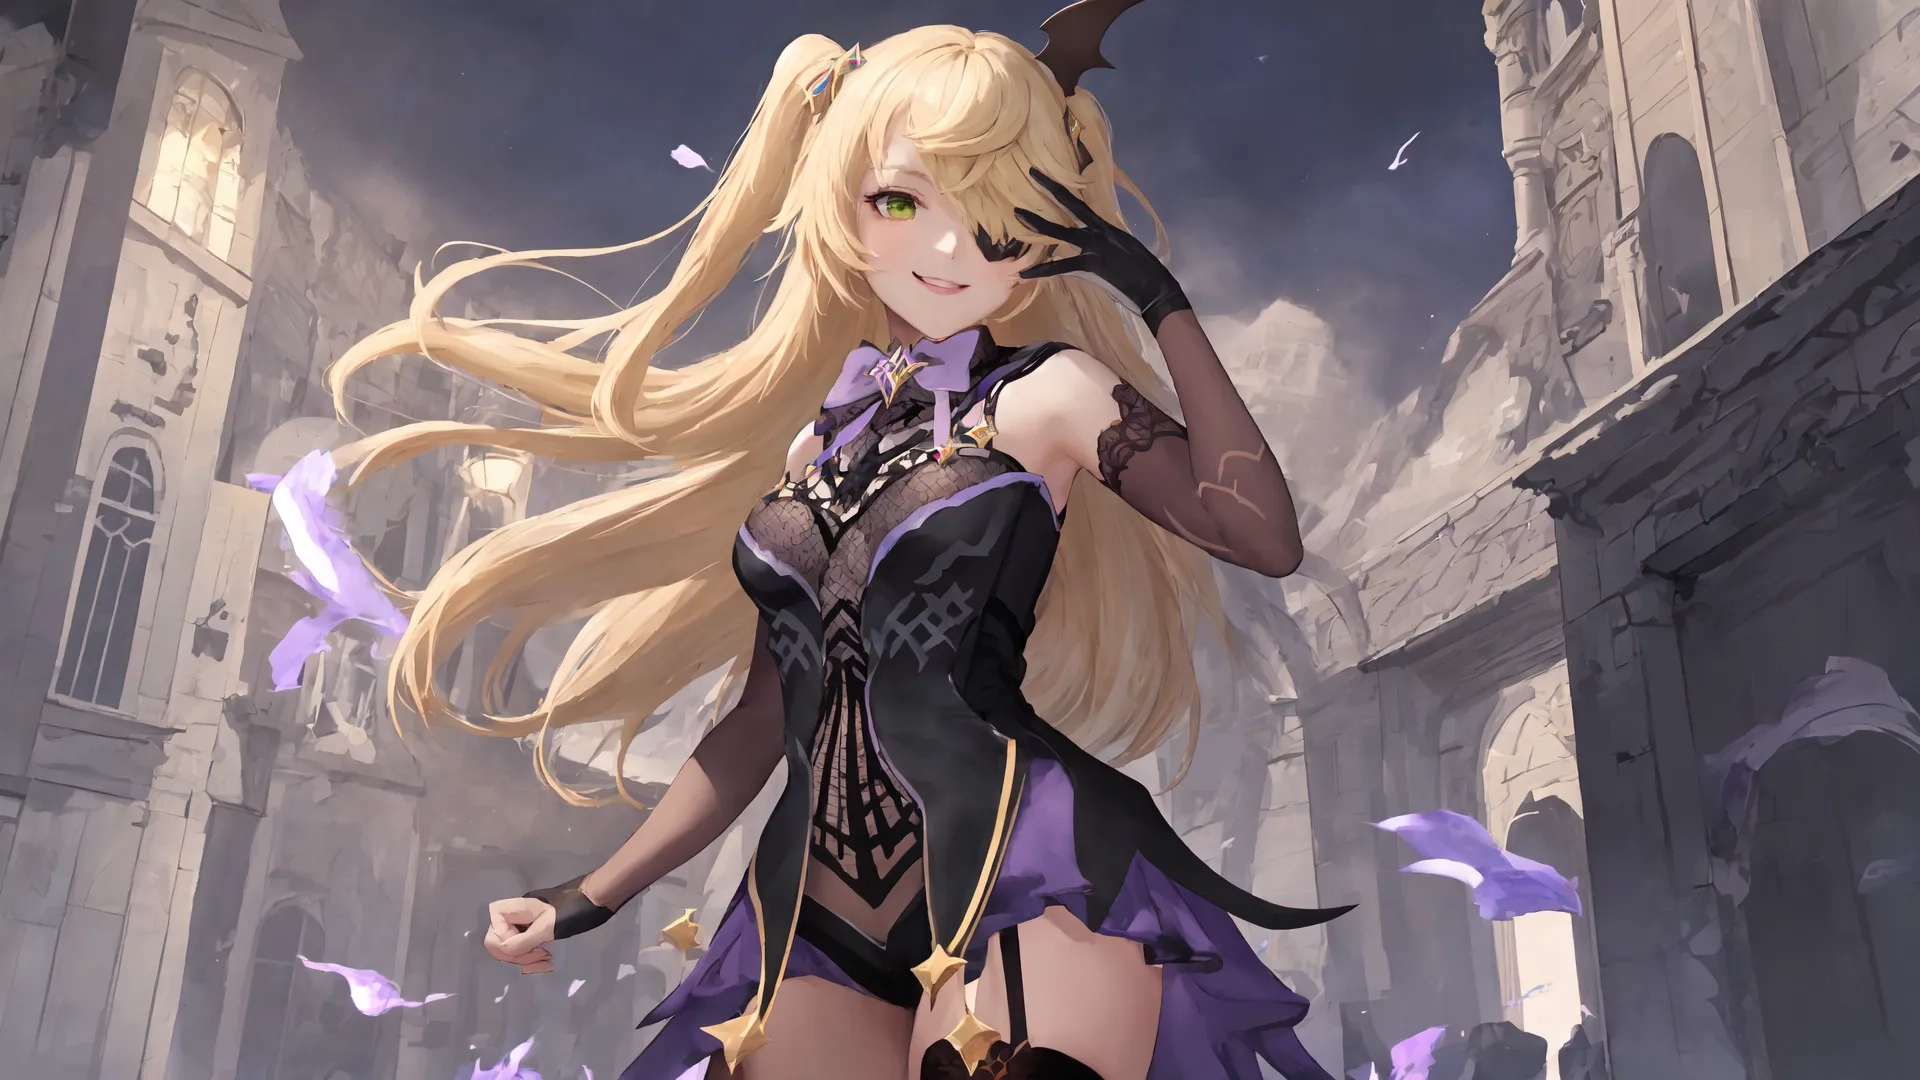 a anime girl on the ground in an elaborate dress and horned hat next to ruins with purple flowers flying nearby and a long haired woman with blonde hair
